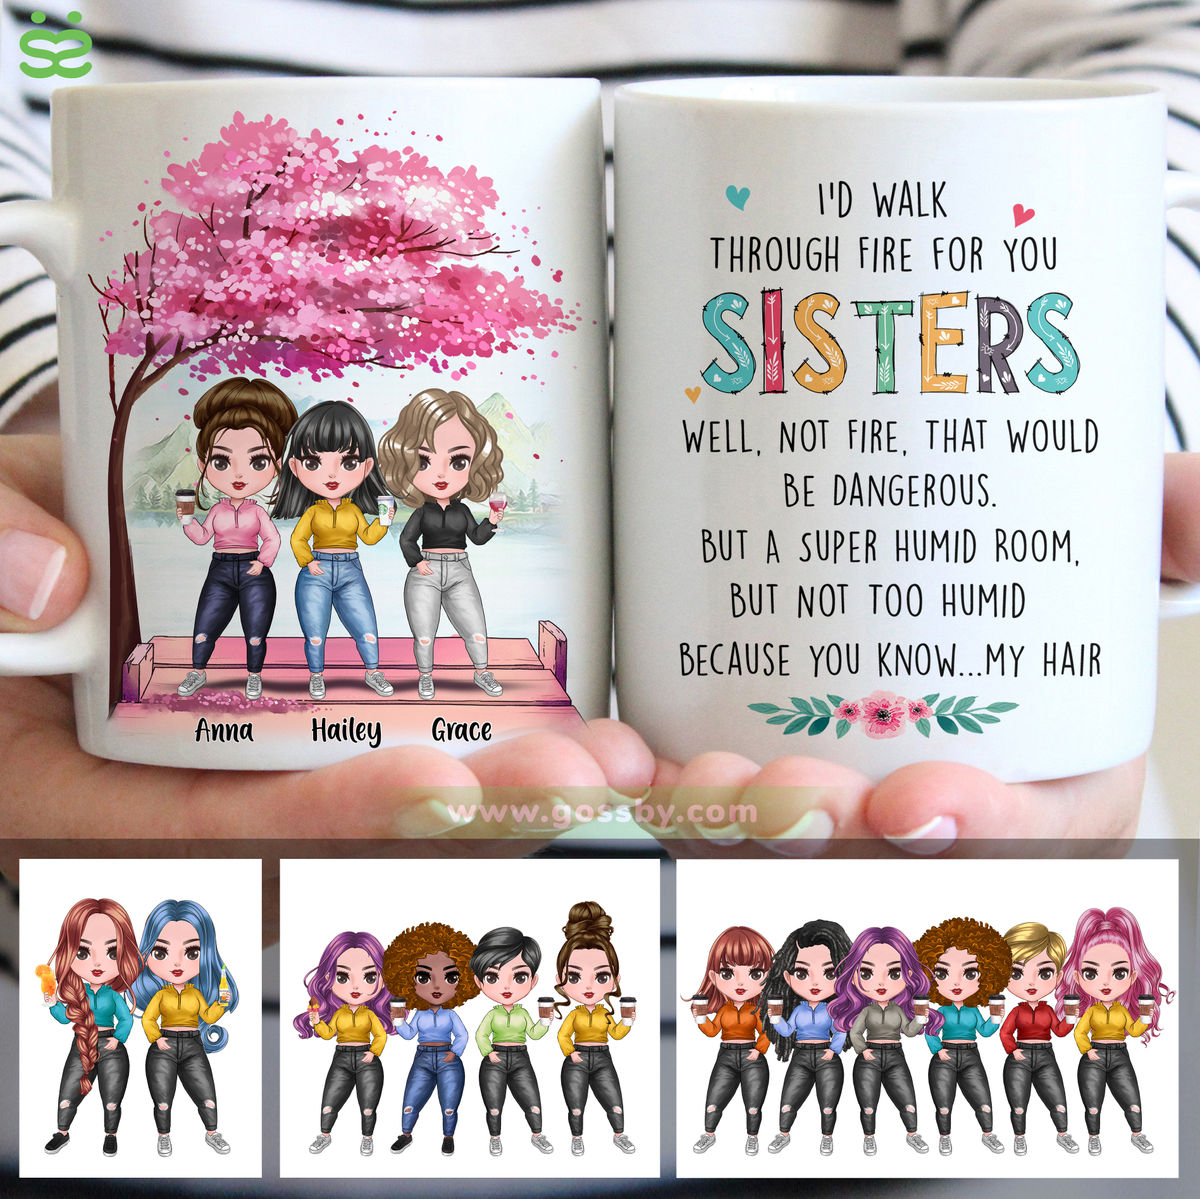 Personalized Mug - Up to 7 Women - I'd Walk Through Fire for You Sisters (7314)